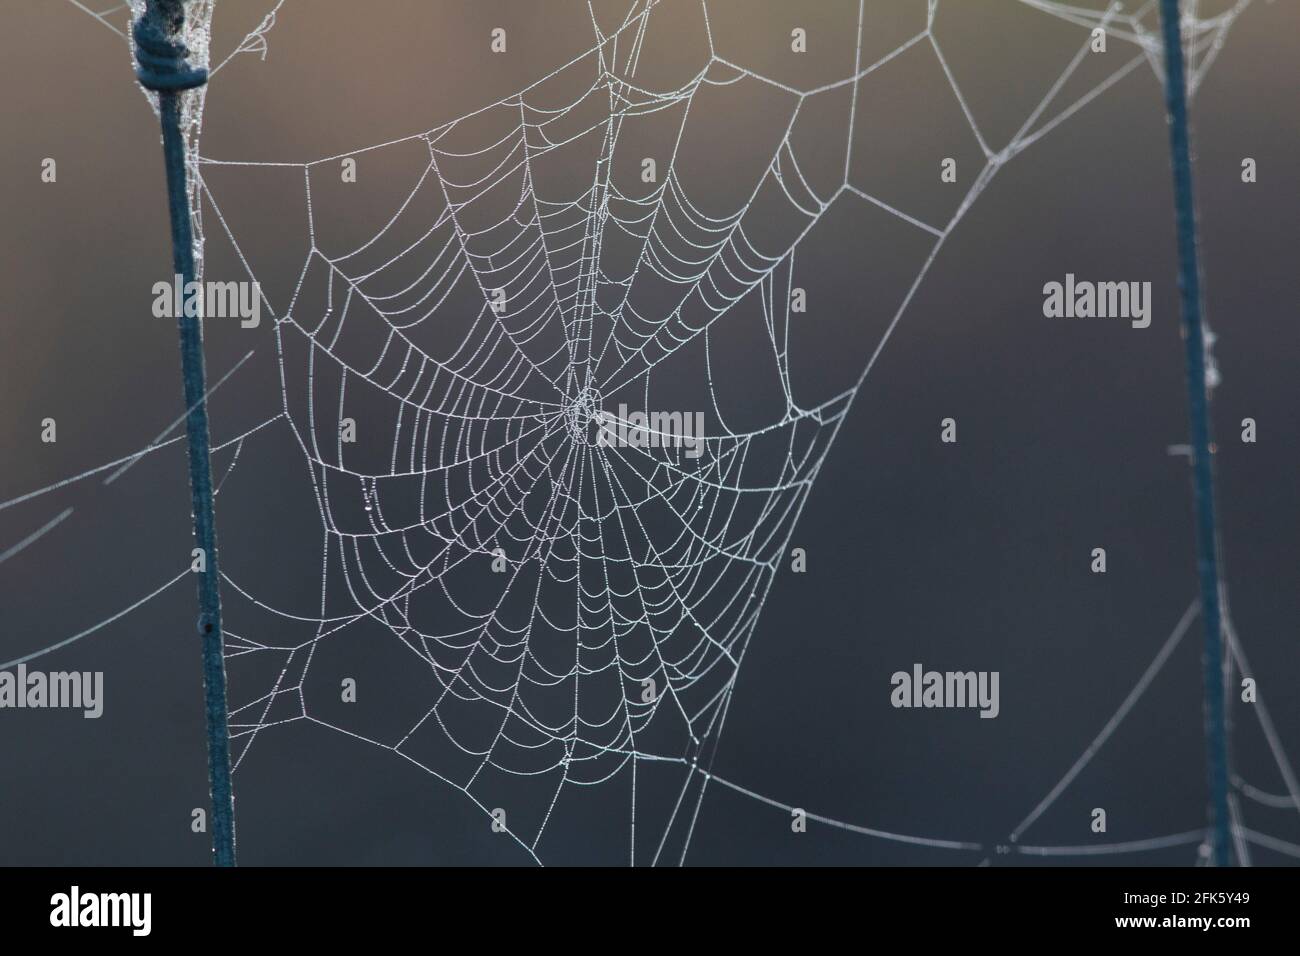 Spider web, dew-covered, natural pattern, San Joaquin Valley, Grasslands Ecological Area, Merced County, California Stock Photo